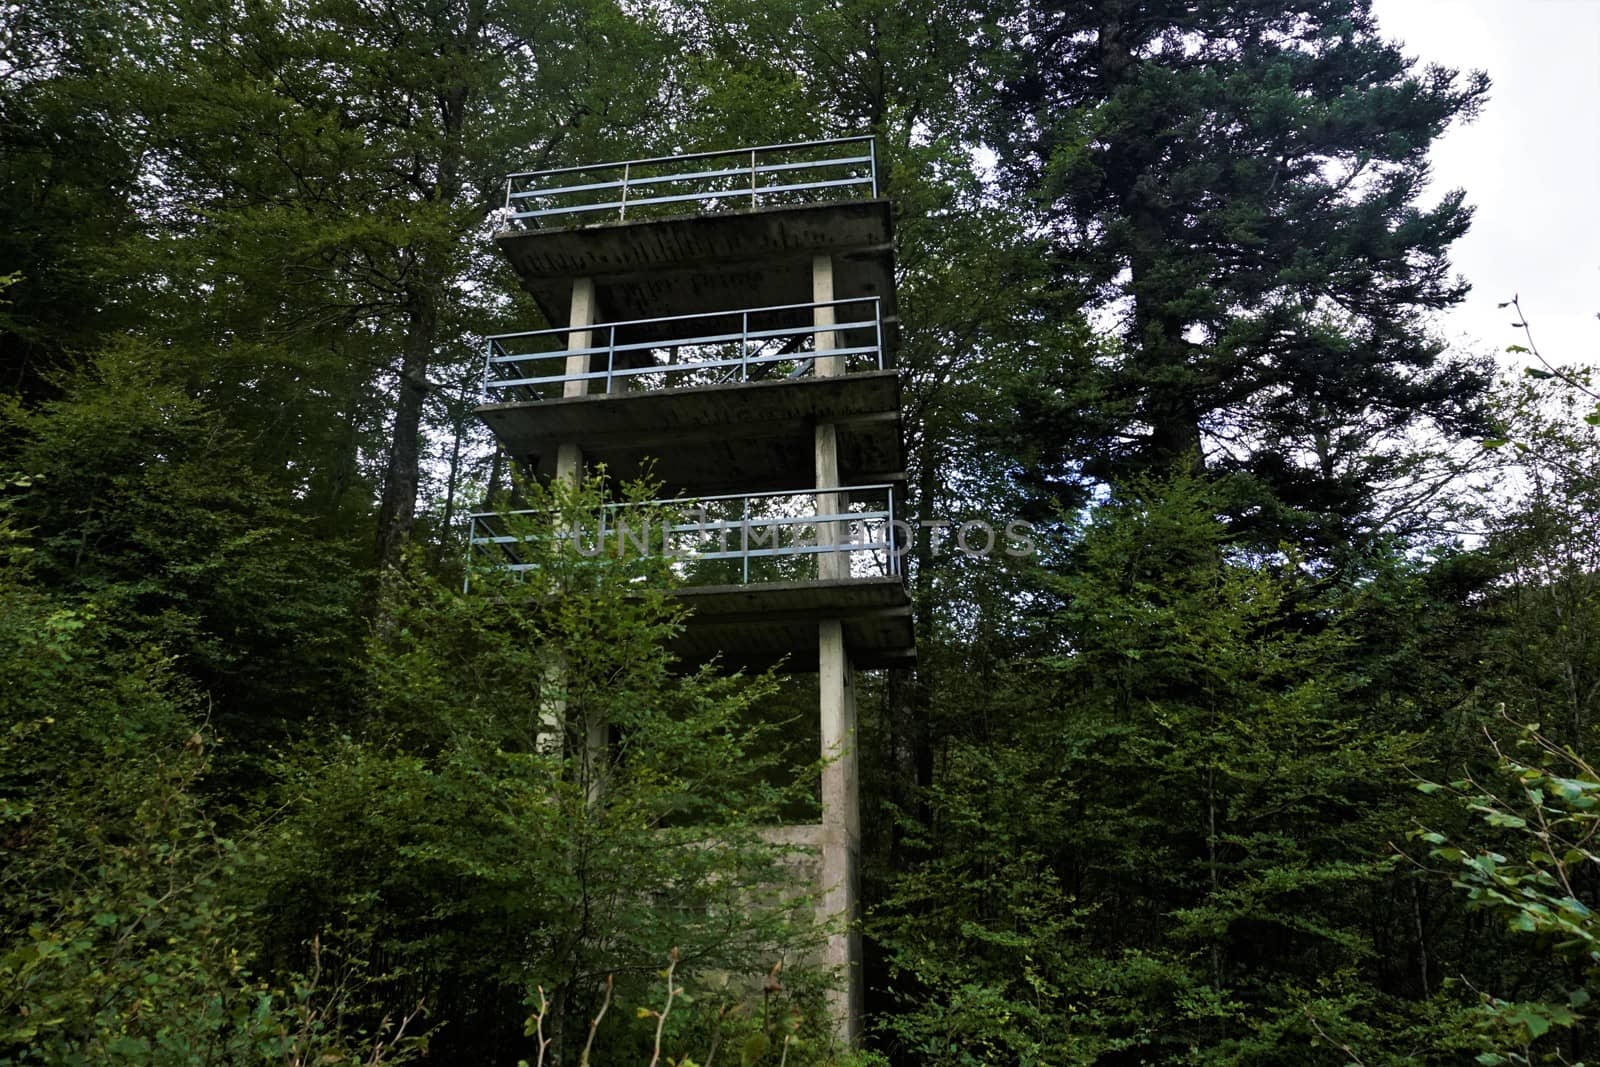 Ruin of a tower made of concrete with guardrail spotted in the forest in the Vosges by pisces2386